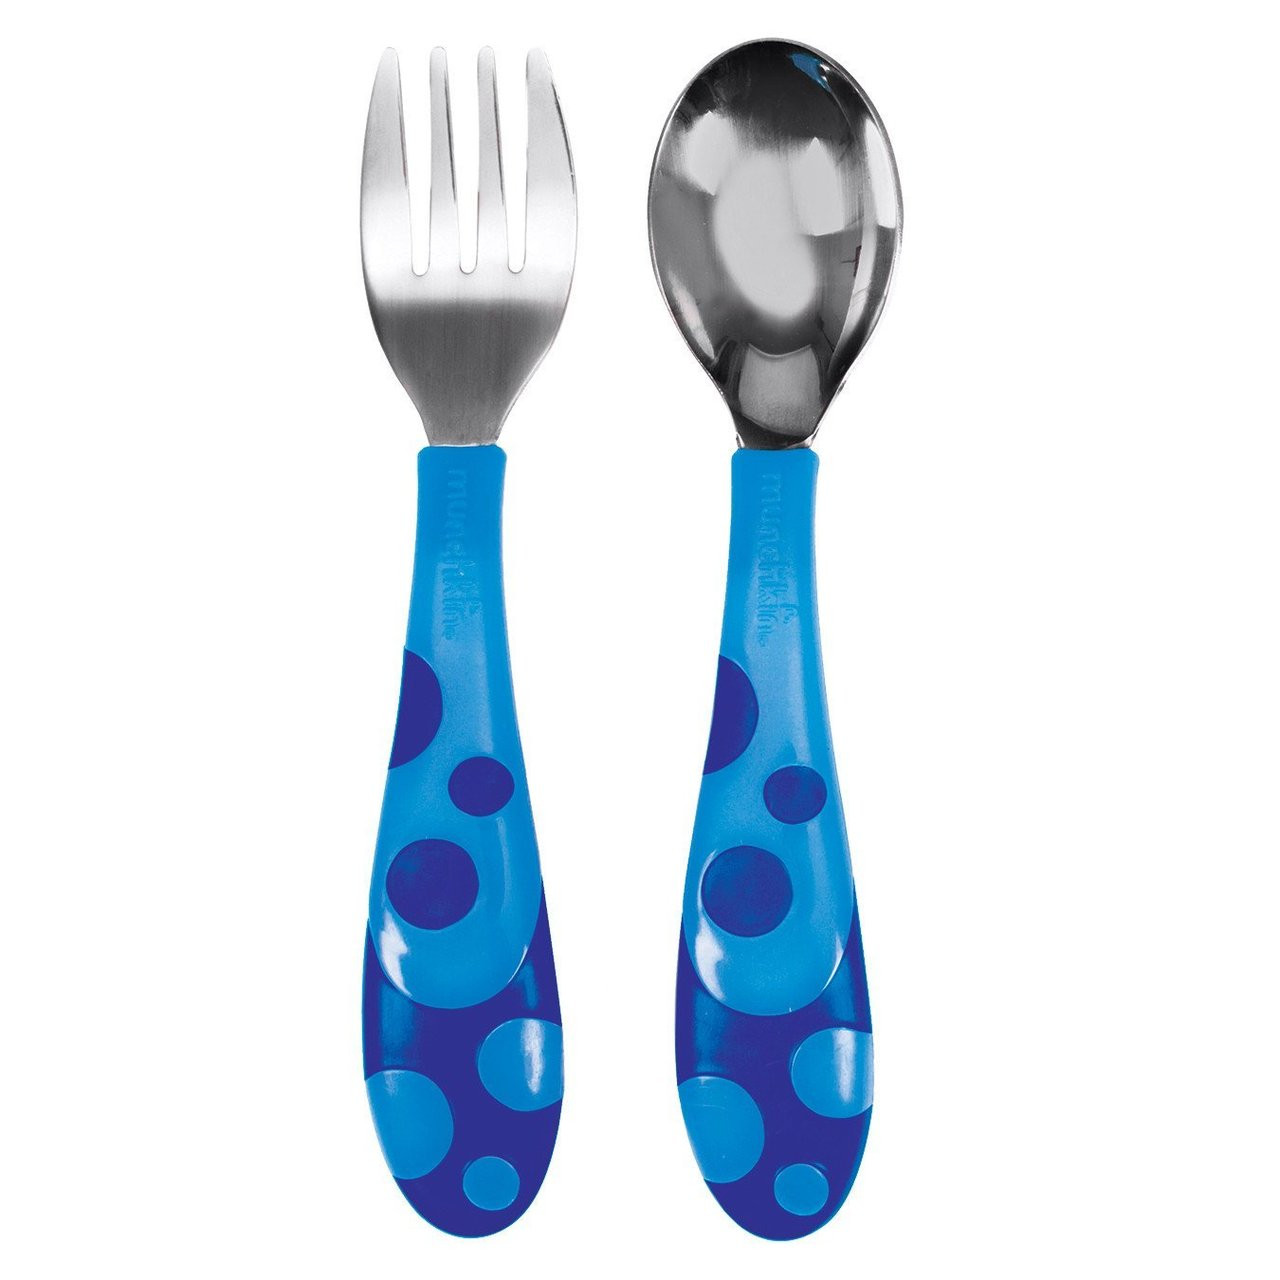 https://cdn10.bigcommerce.com/s-h30fgwwj/products/2389/images/8386/32008_ForkSpoon_Blue__68538.1417152894.1280.1280.jpg?c=2